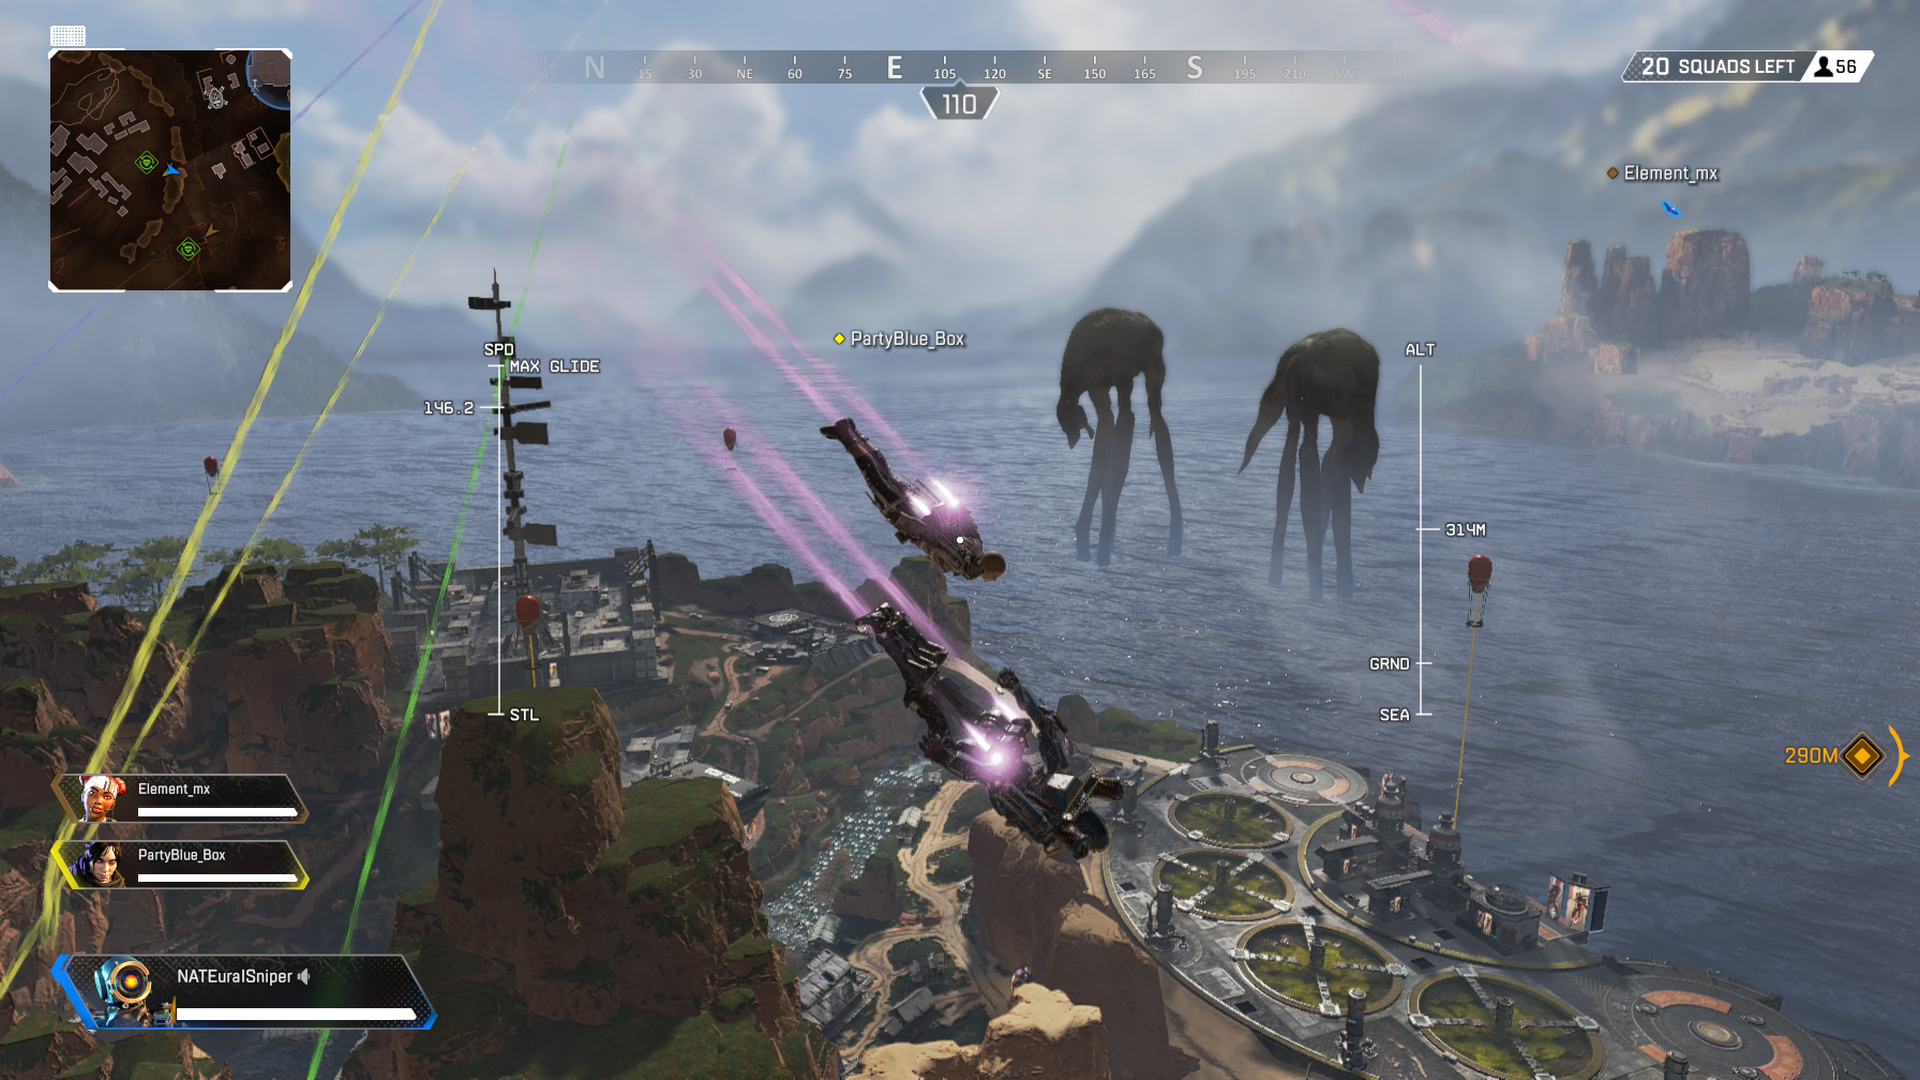 Apex Legends won't get any of the cancelled mobile game's content